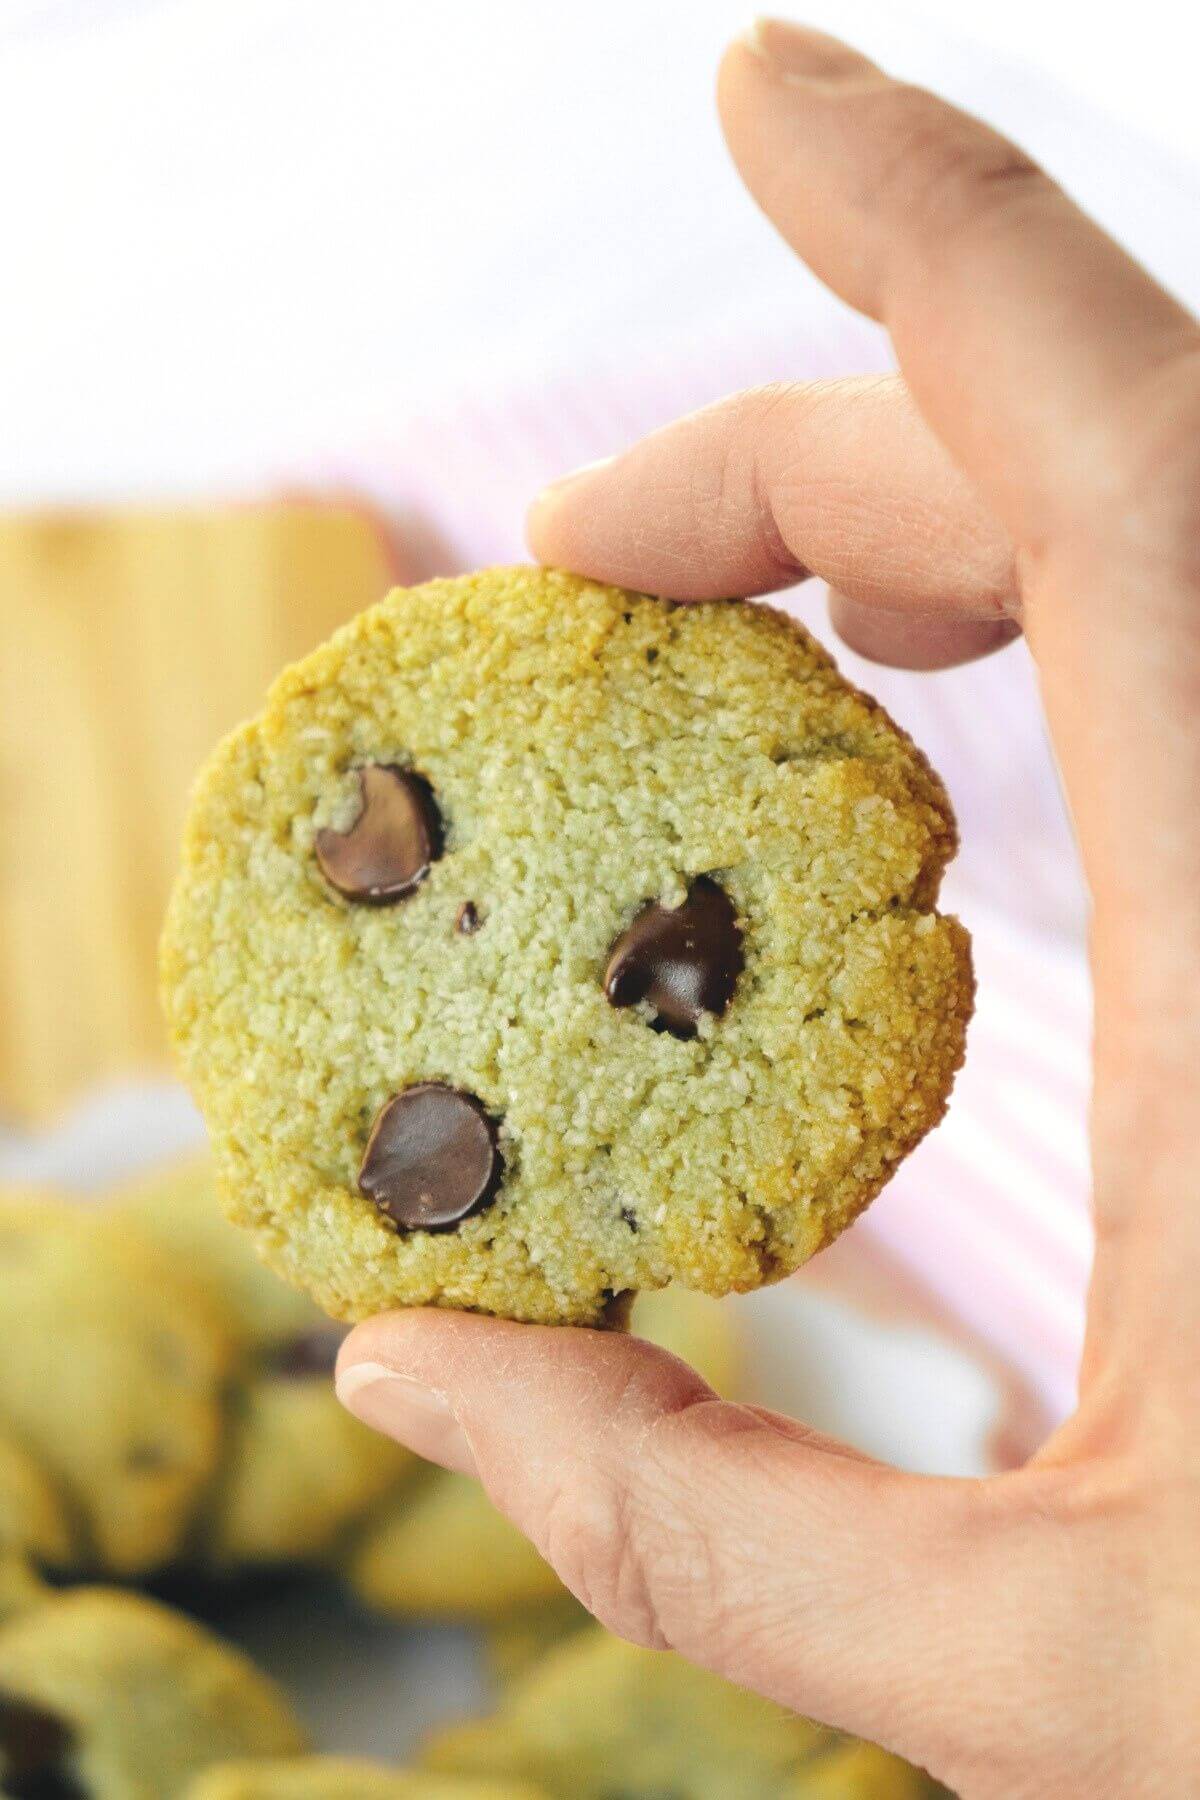 A hand holding up a gluten free matcha cookie with three chocolate chips showing